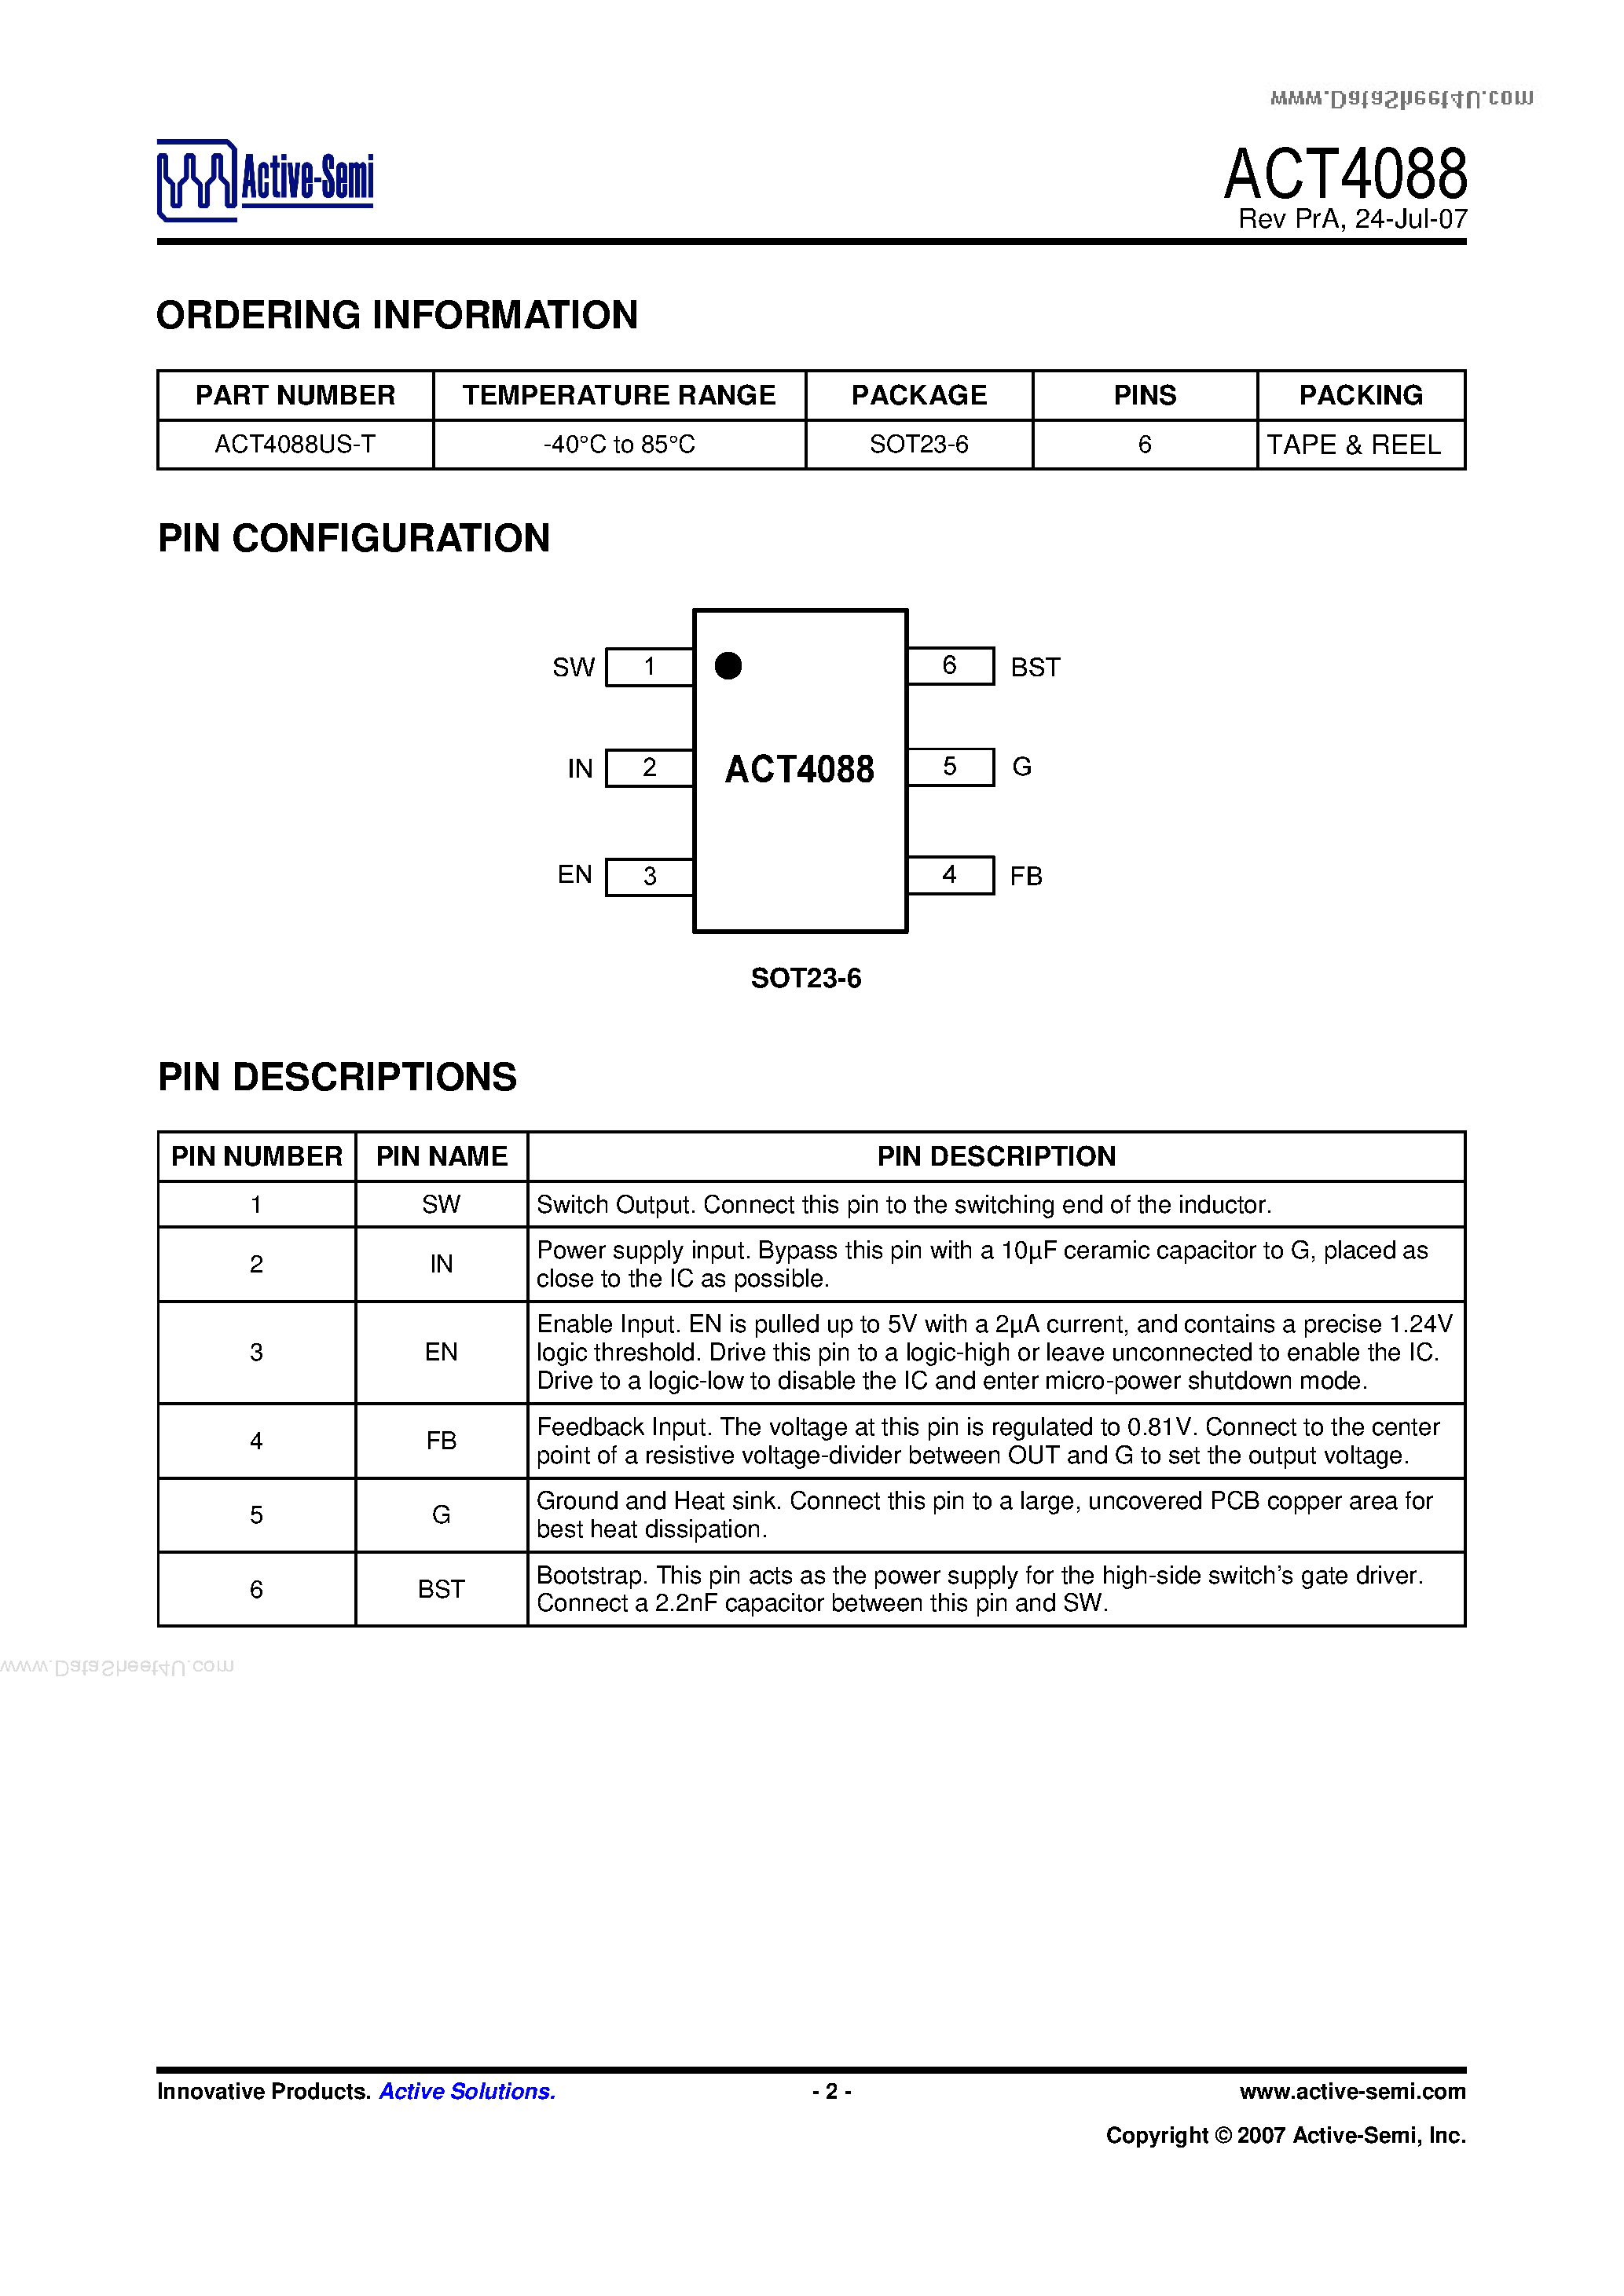 Datasheet ACT4088 - 1.4MHz Step-Down DC/DC Converter page 2